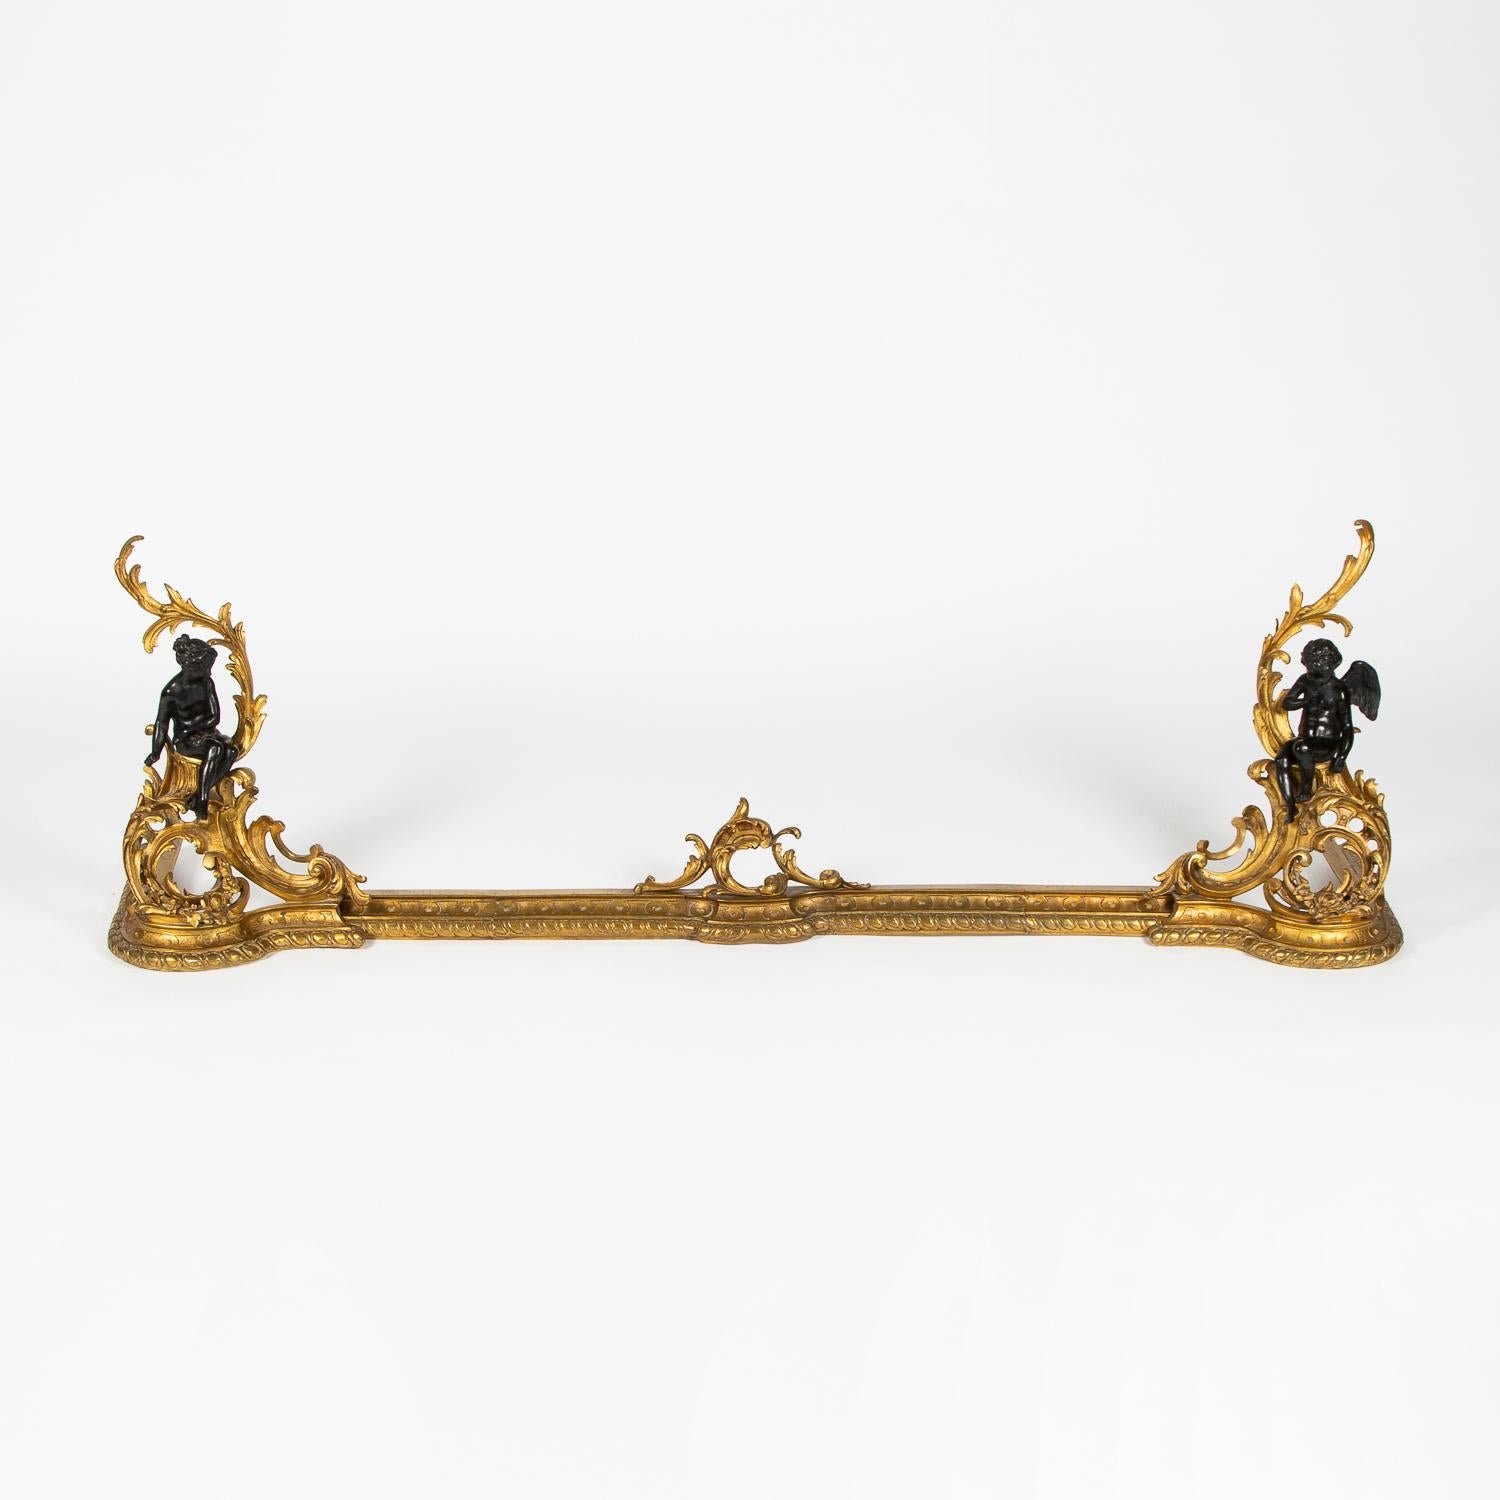 A late 19th century French gilt bronze chenet, in the Louis XV style, with fender of adjustable width.

Each end with classical figures sitting within floral scrolls.

Maximum width: 64 inches - 162 cm.

Minimum width: 46 1/2 inches - 118